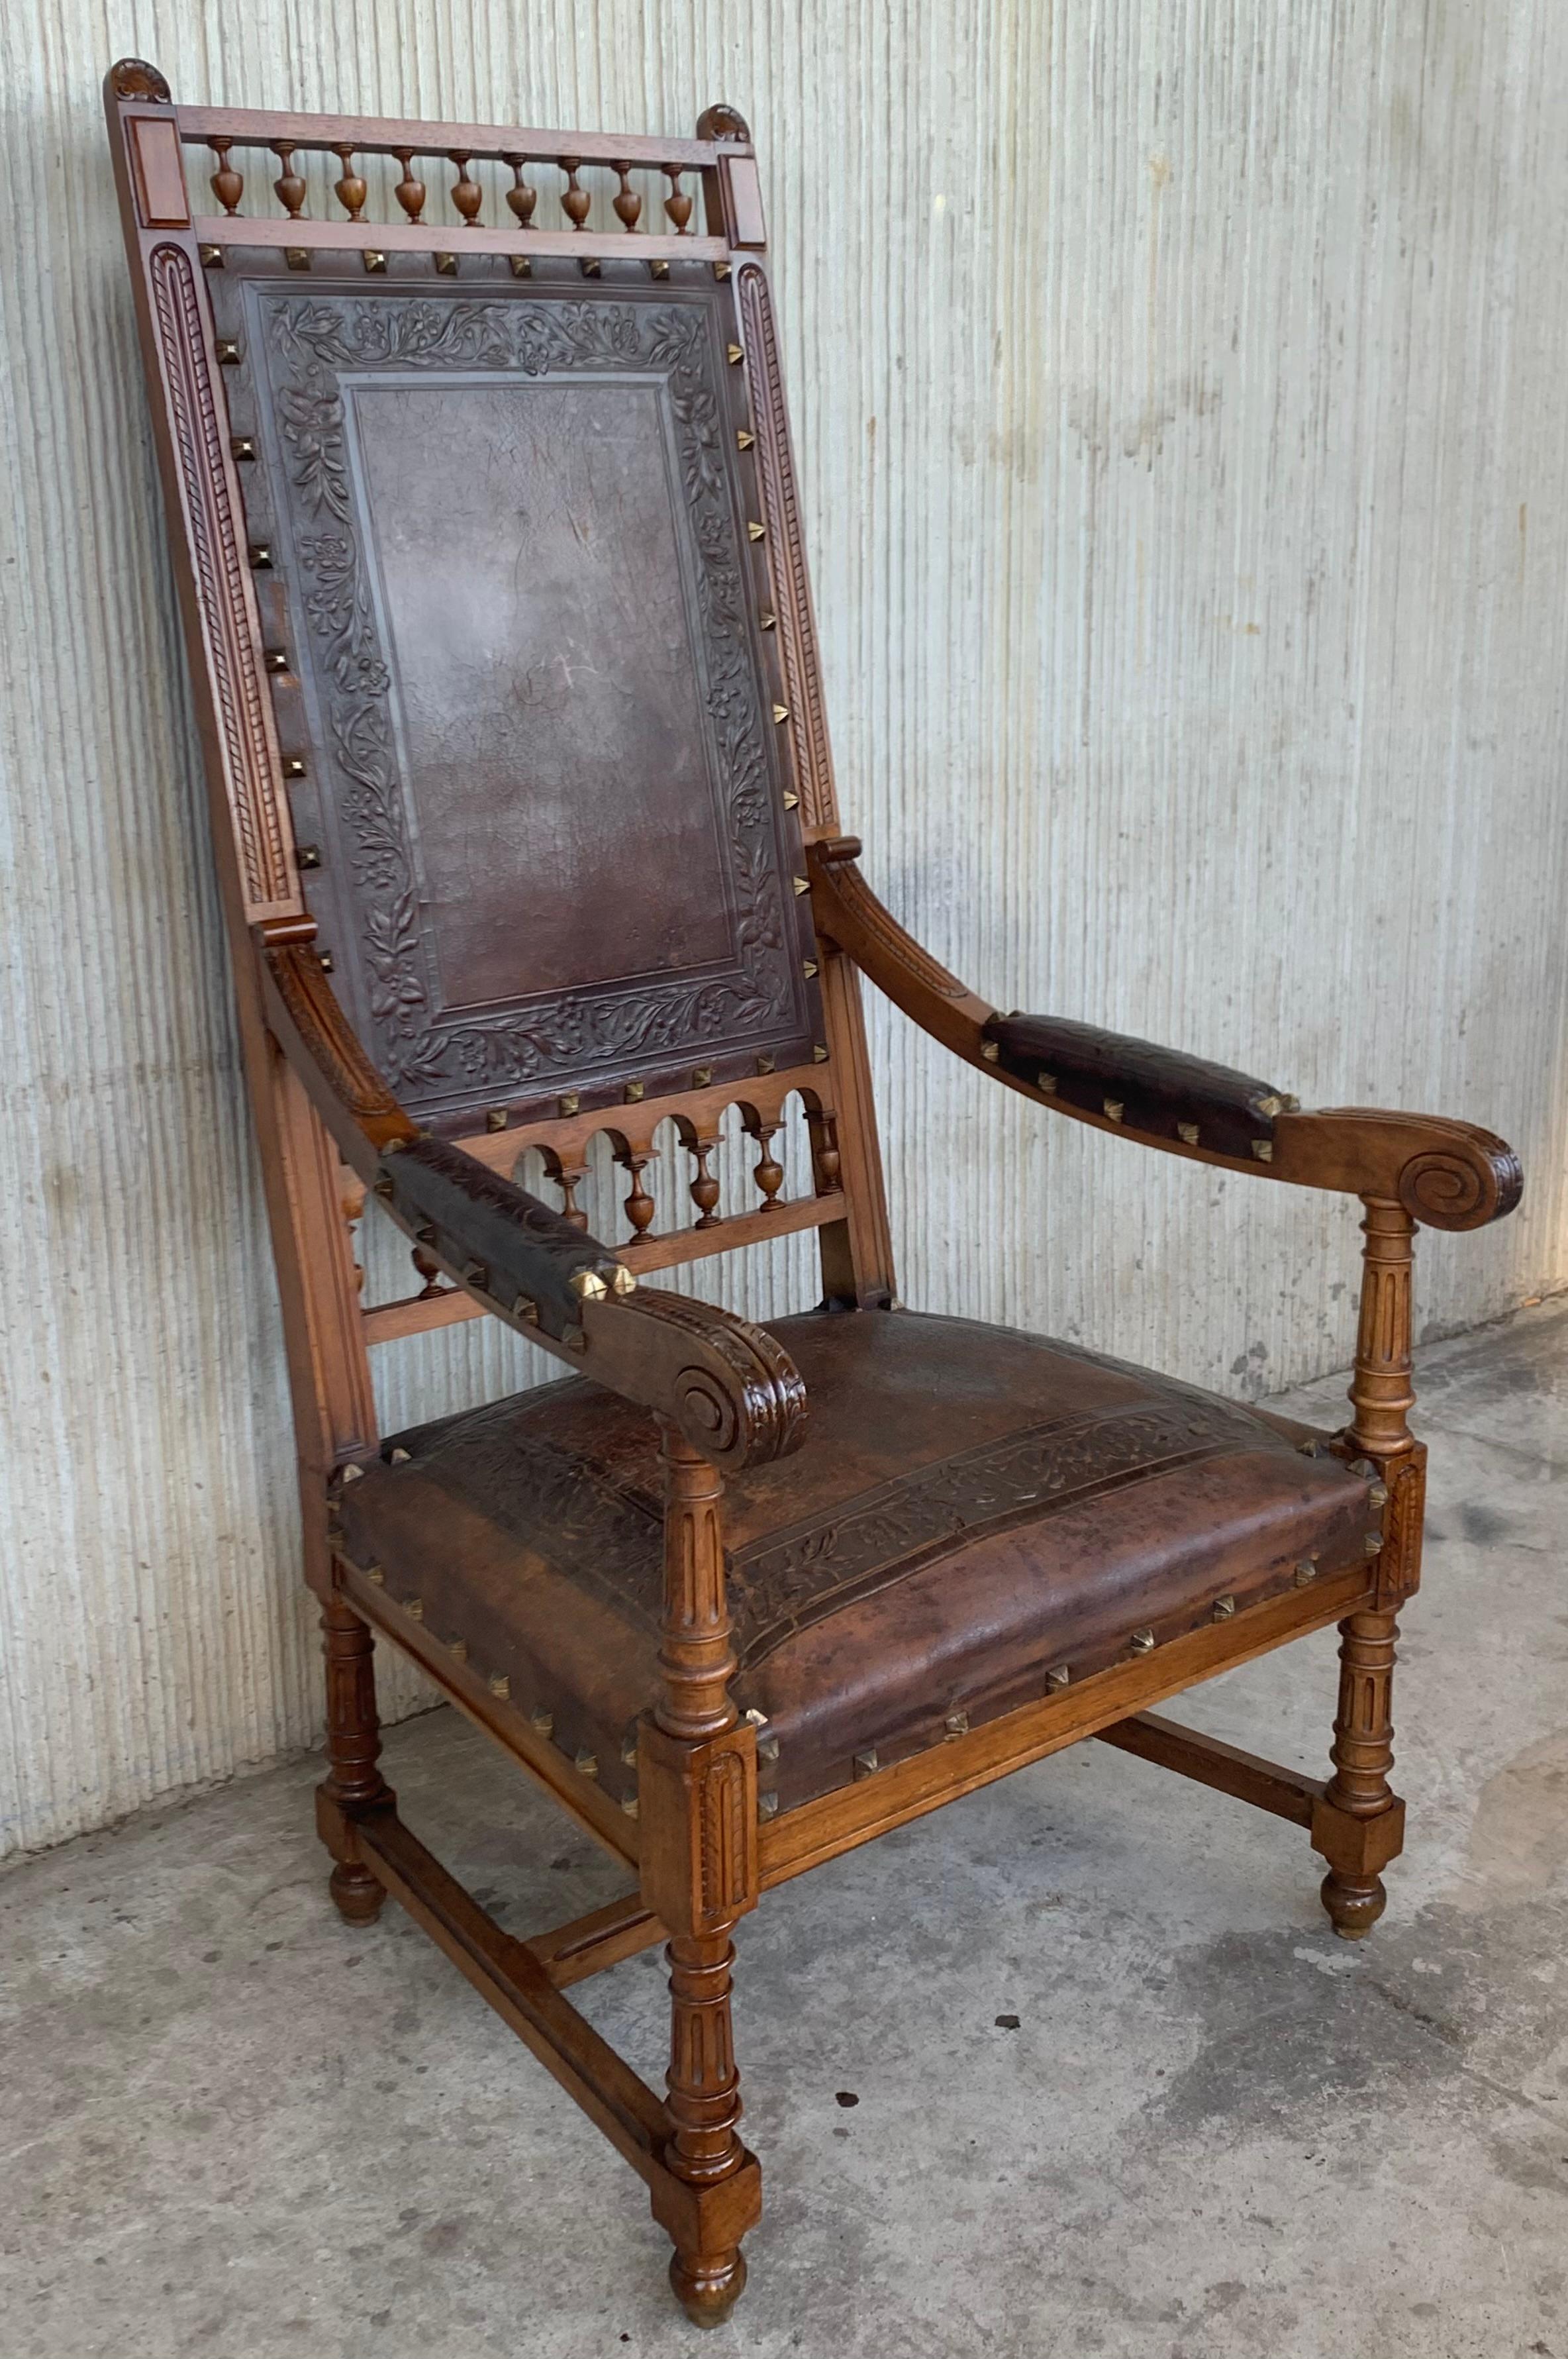 Louis XVI style pair of carved armchairs, Italy, 1900s
Good antique condition with some minor marks from used and age.
A set of two antique baroque side chairs hand-crafted out of walnut wood in a good condition. This set of dining chairs features